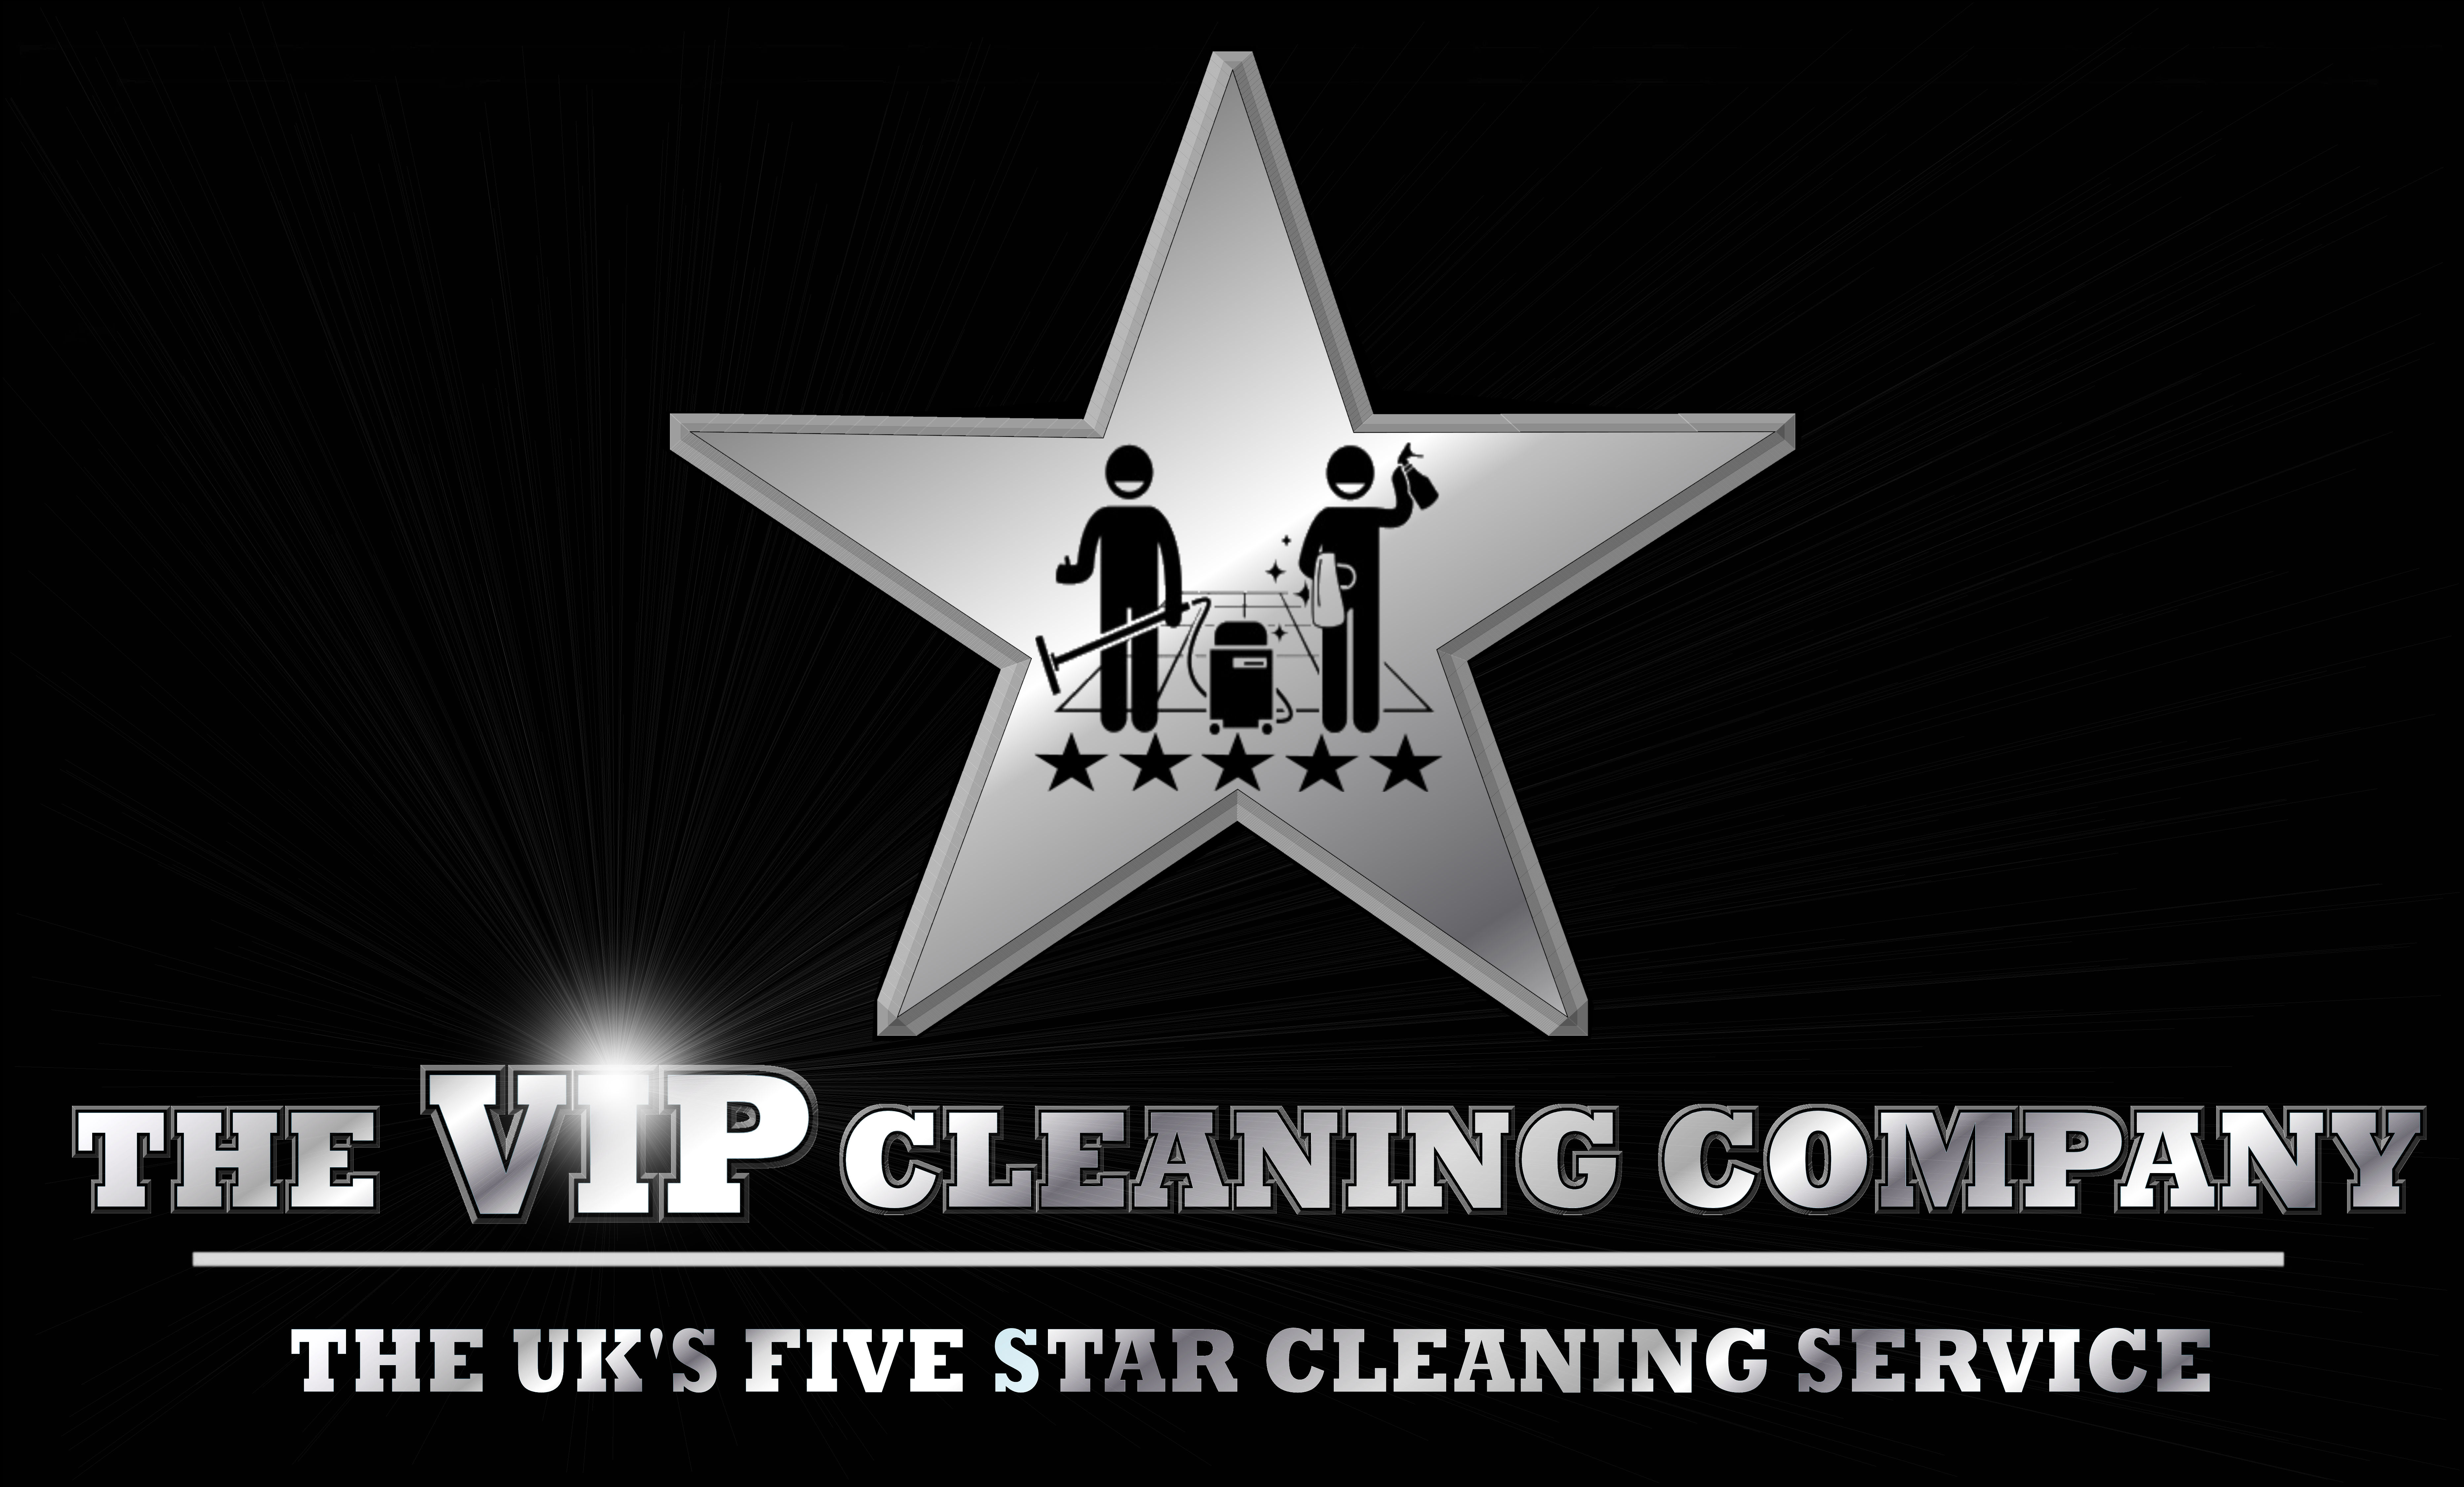 The VIP Cleaning Company - Top rated cleaning company in York and surrounding areas